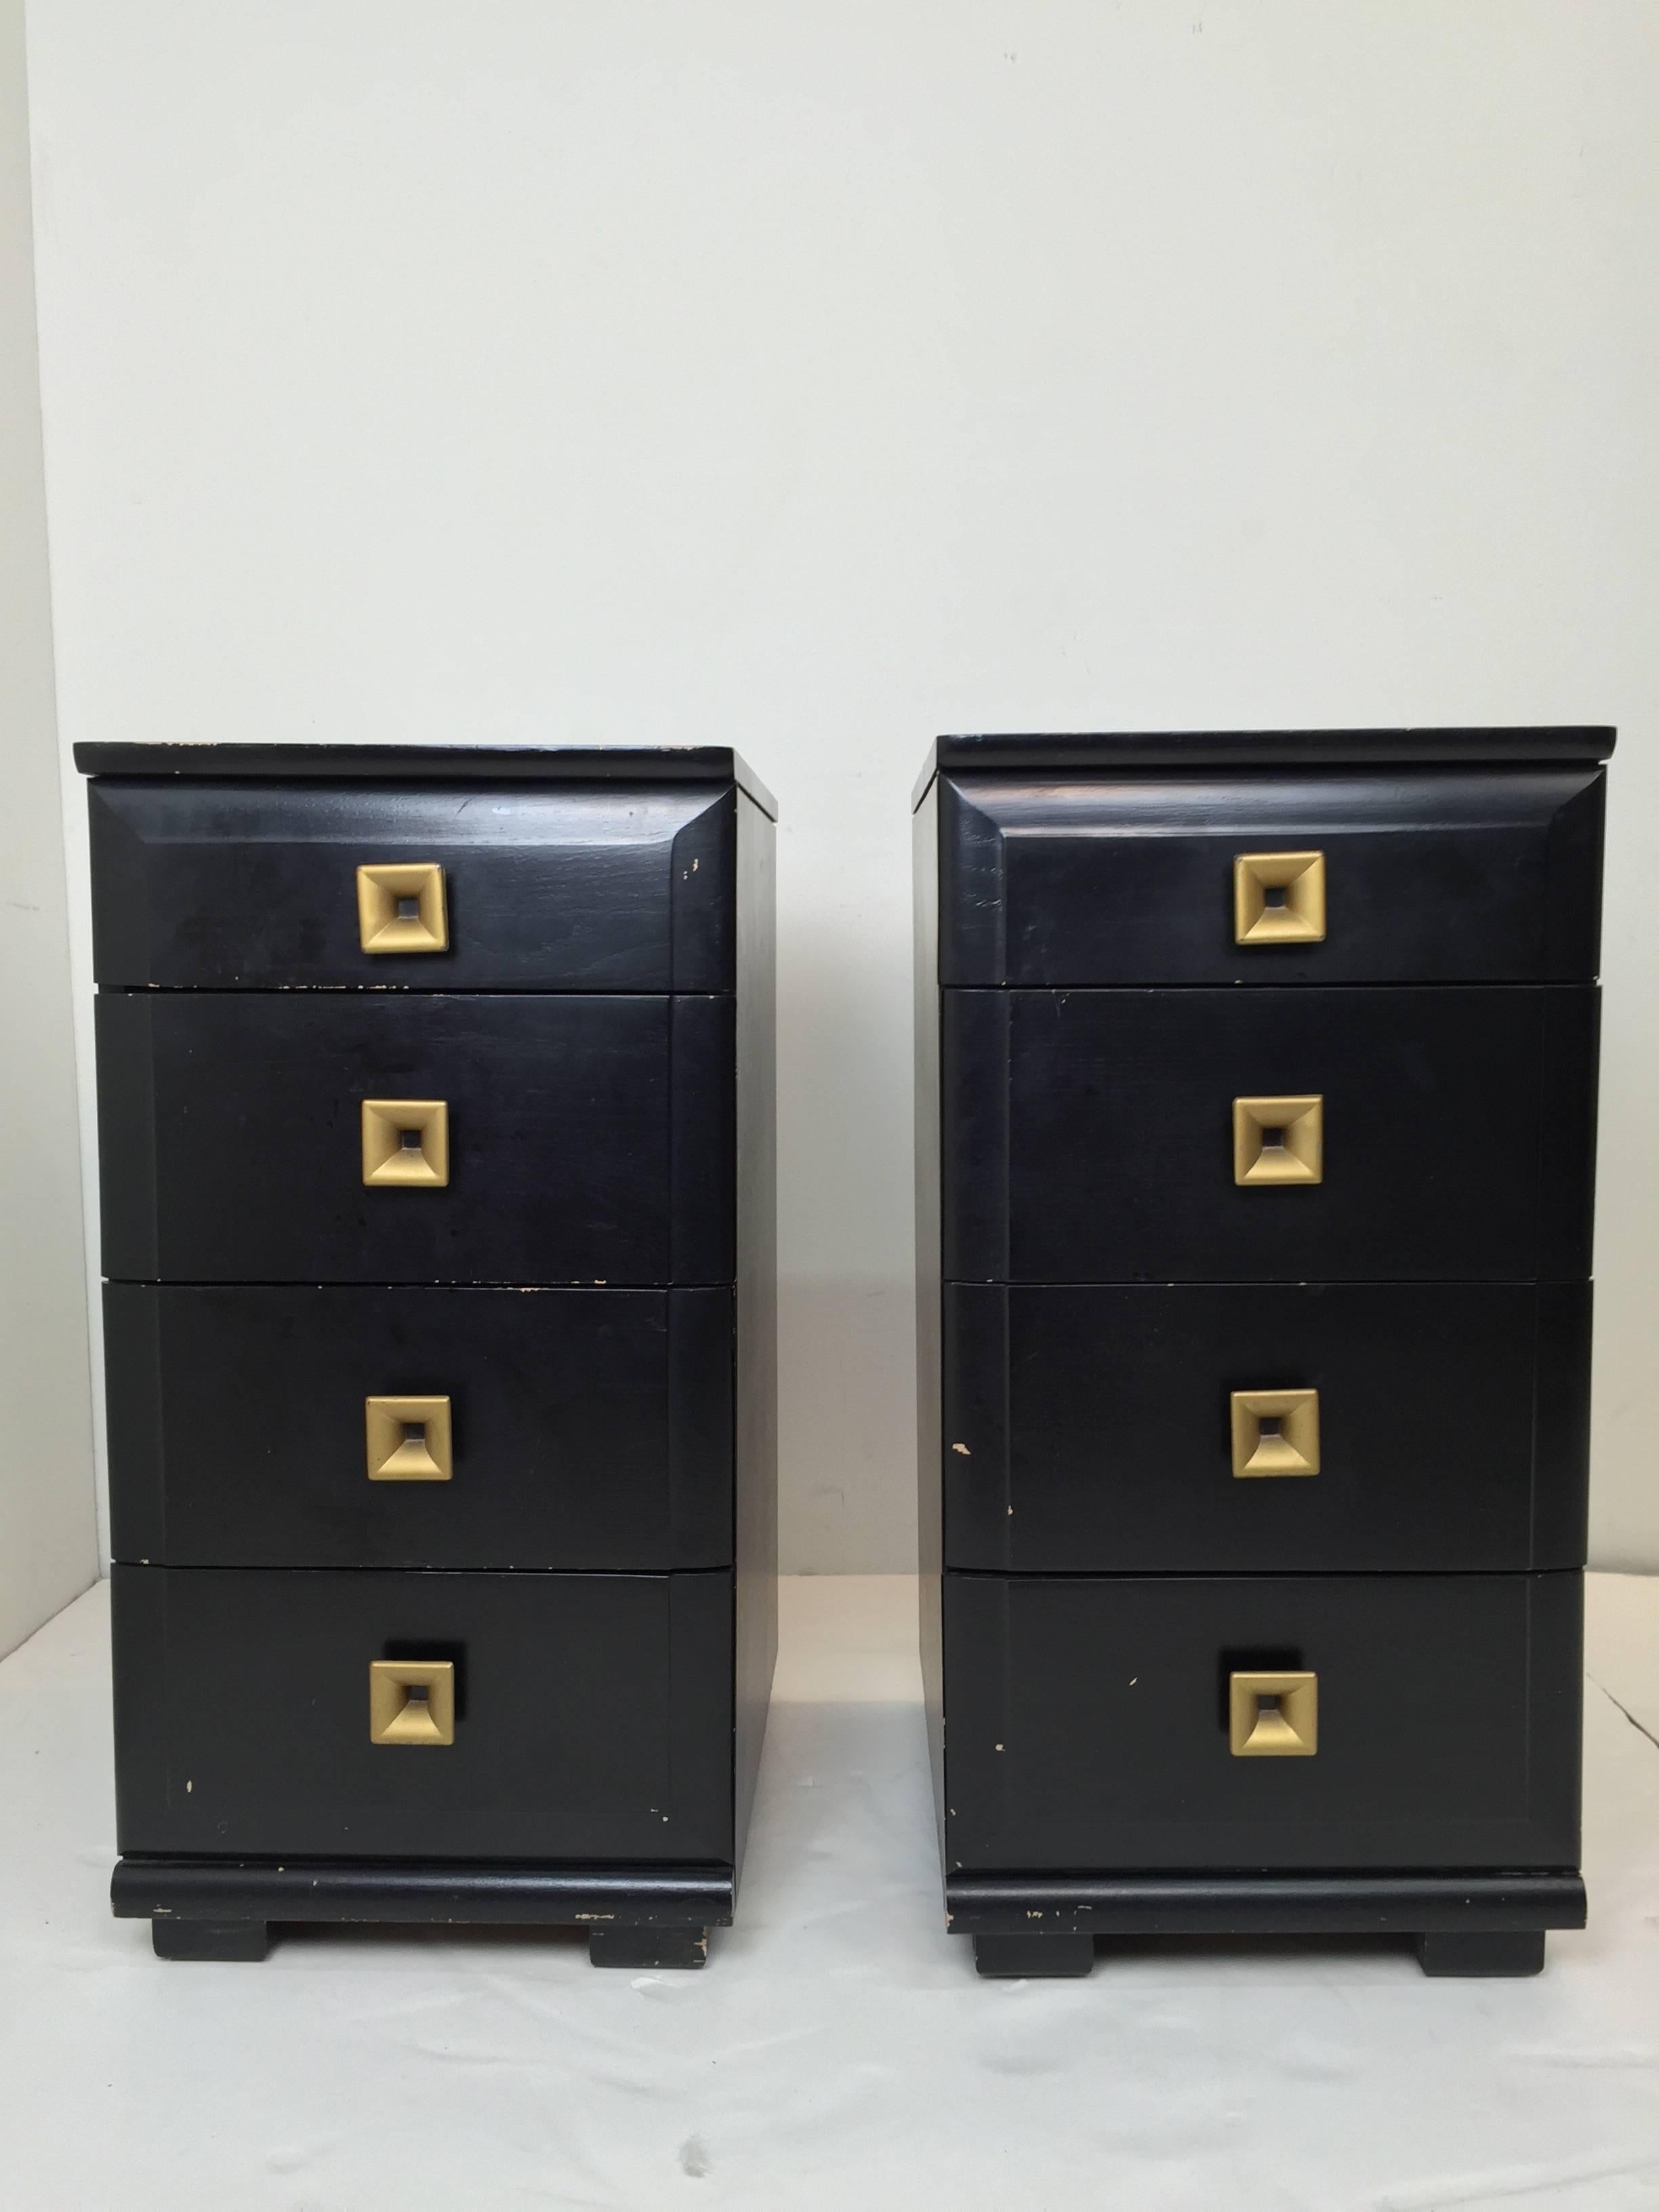 Pair of Nightstands in the style of Raymond Loewy for Mengel with Great Storage 1